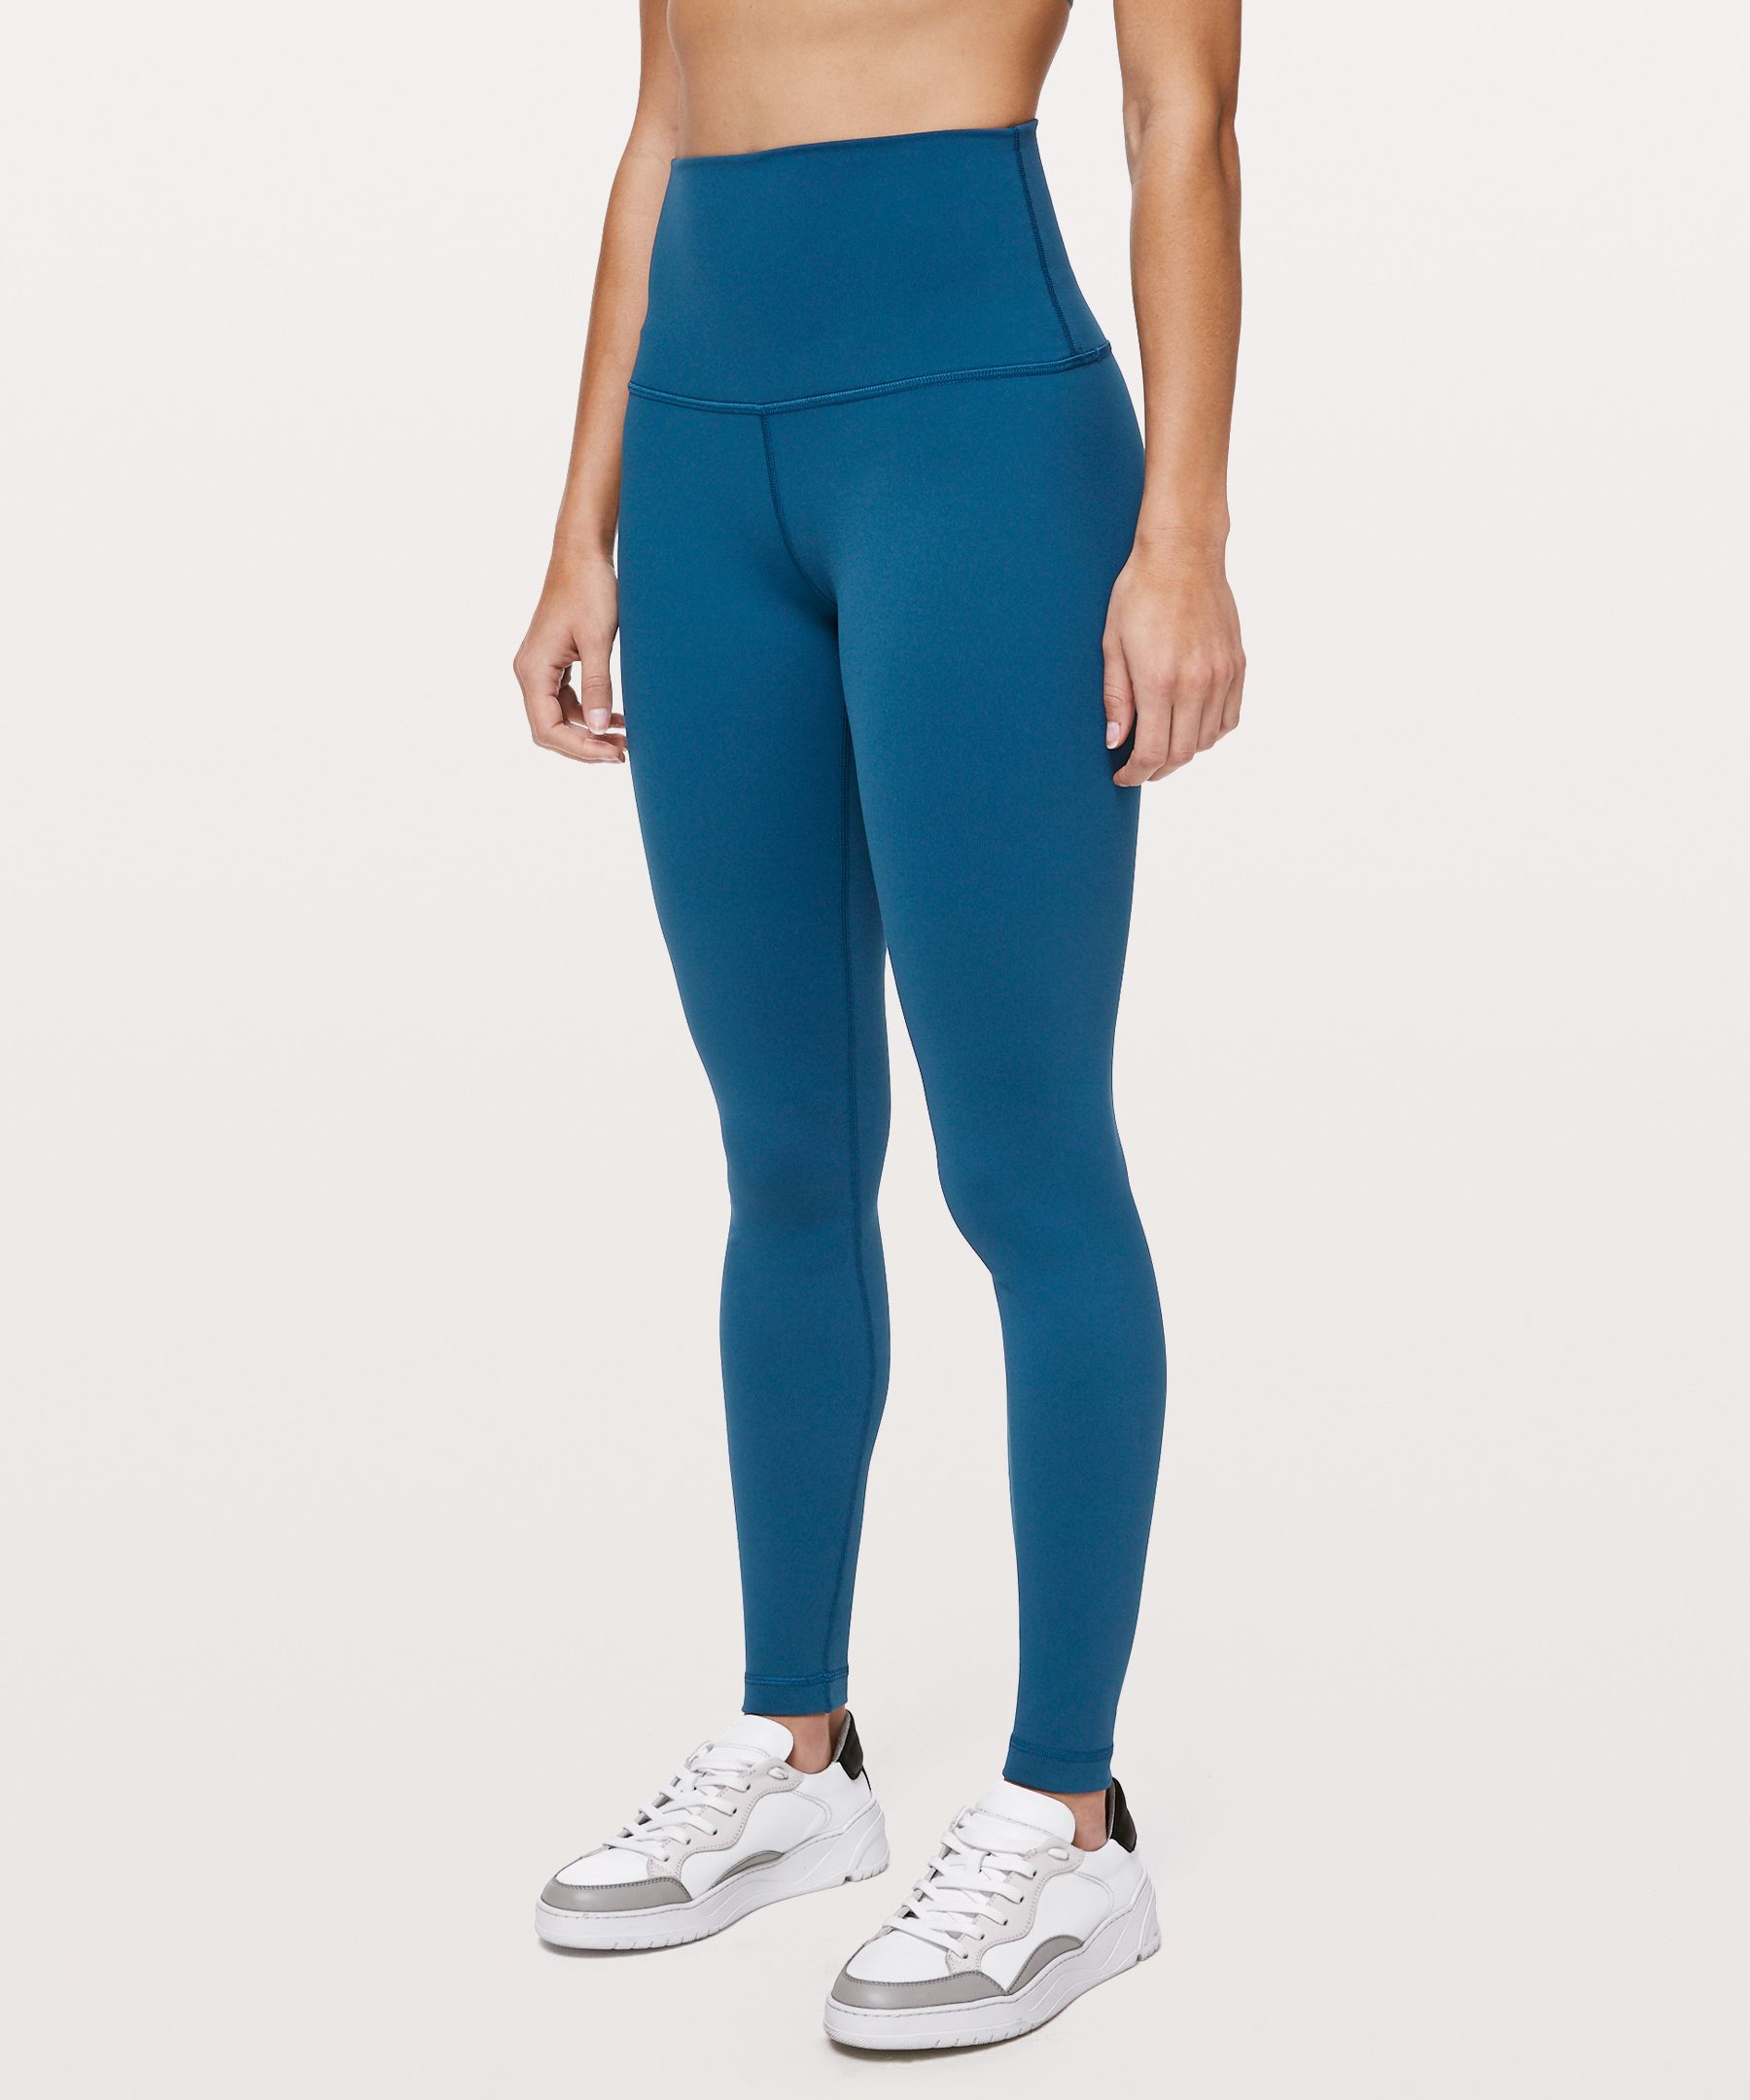 Lululemon Wunder Under Super High-rise Tight *full-on Luon Online Only 28" In Deep Marine